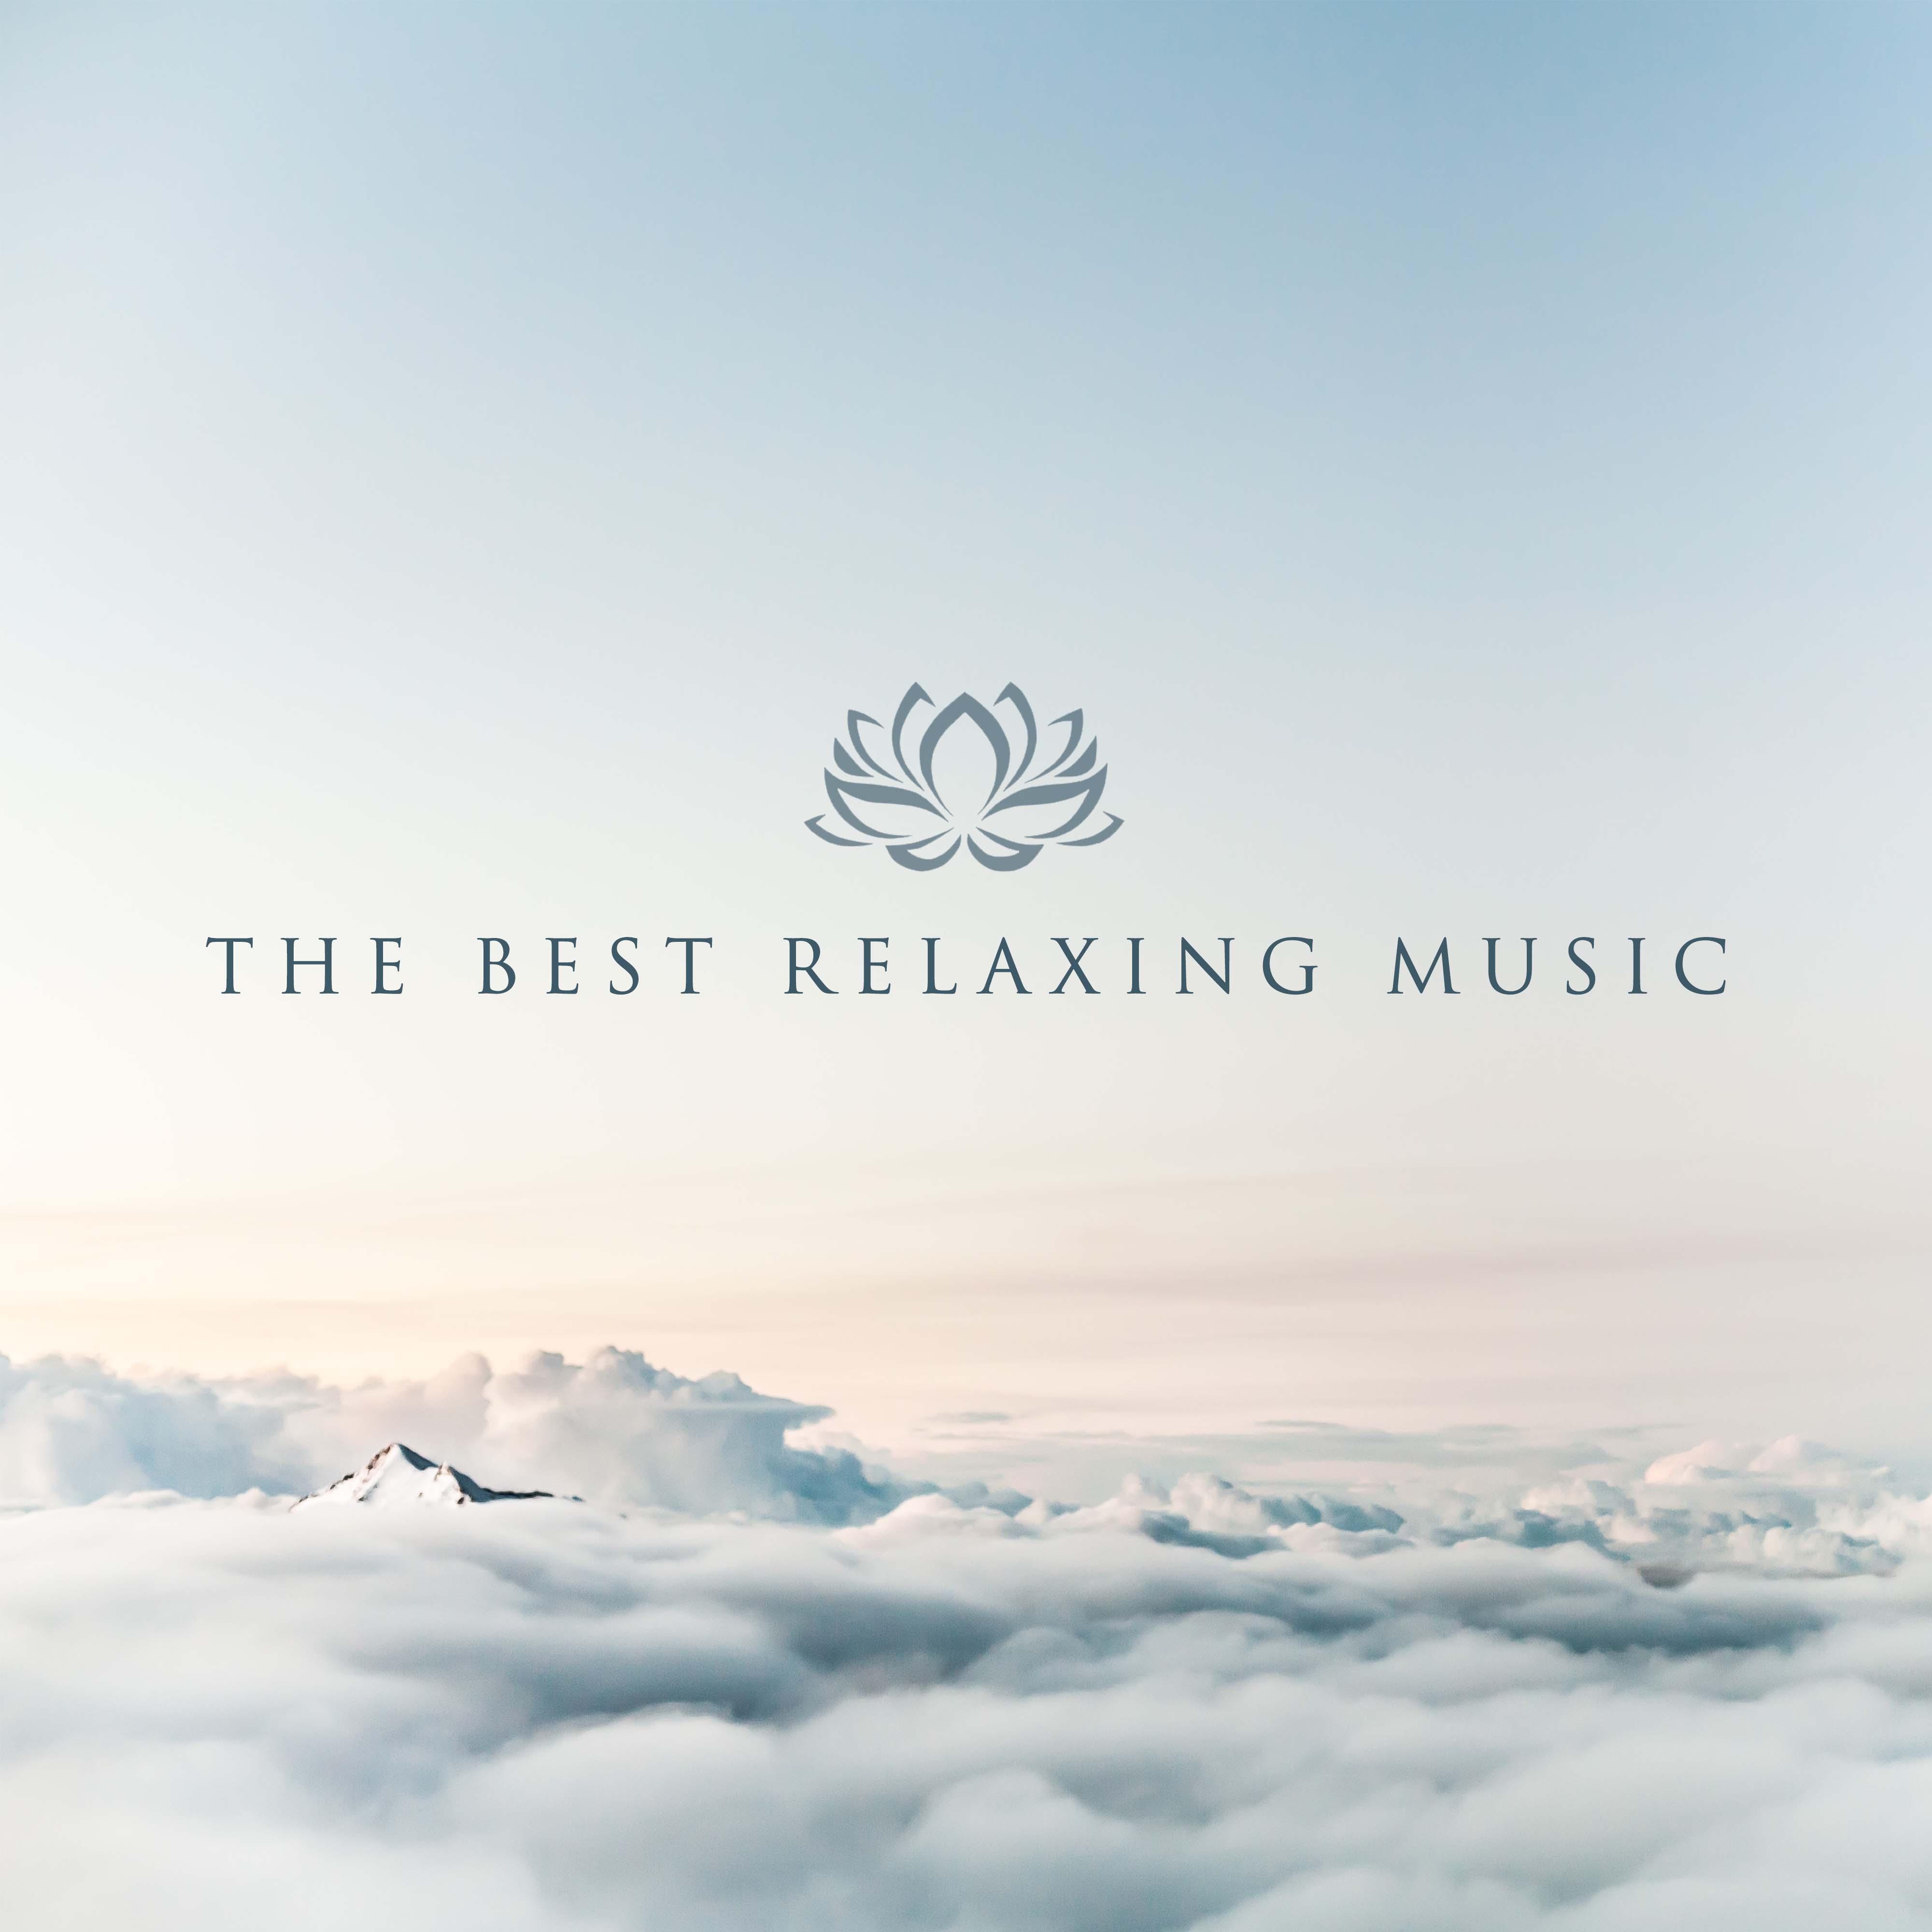 The Best Relaxing Music